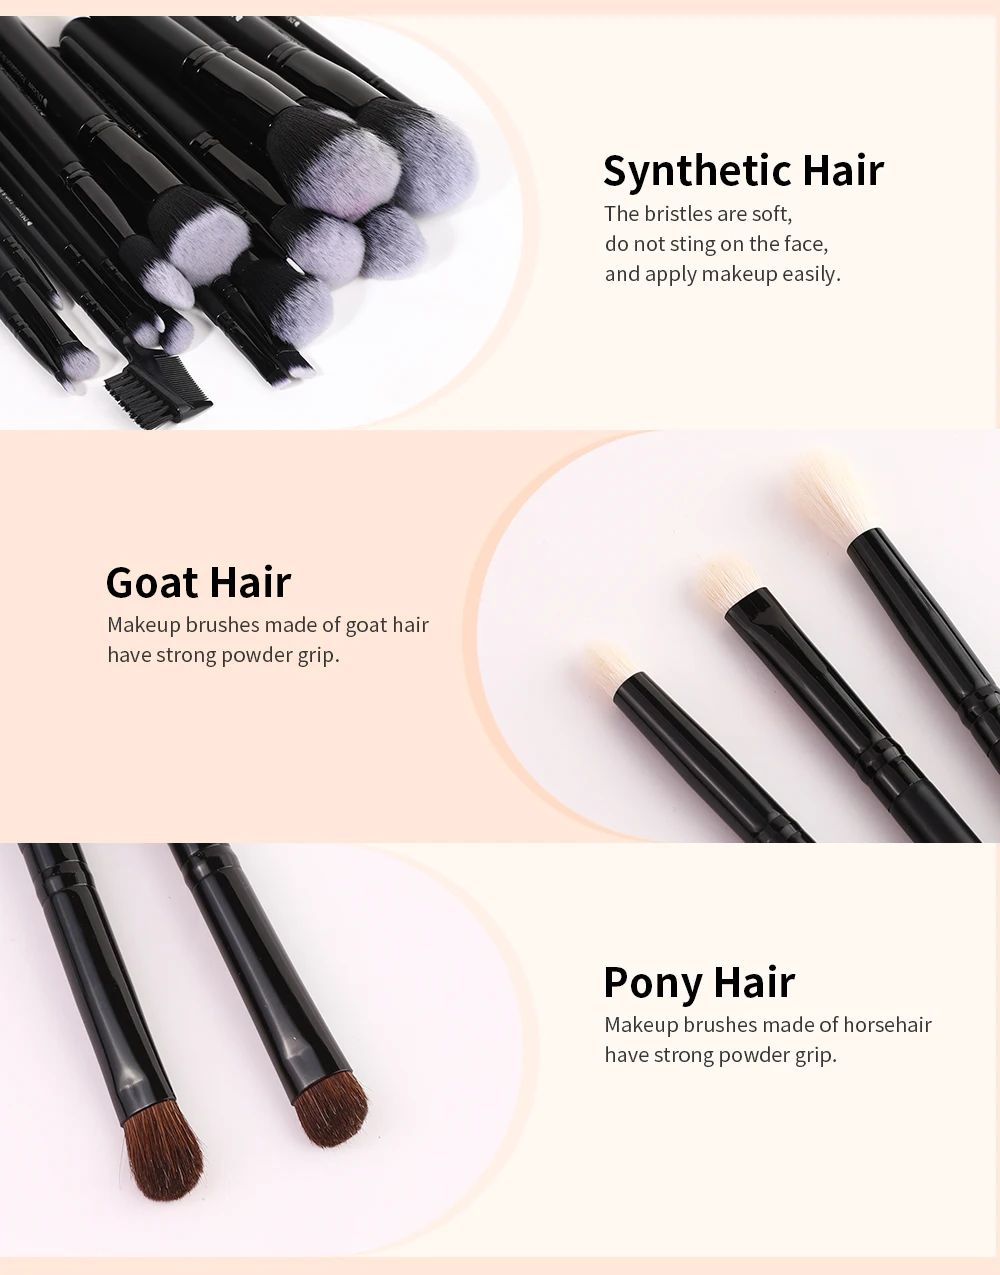 DUcare Black Makeup Brushes 8-27Pcs Synthetic Goat Hair make up brush Foundation Eyeshadow Beauty Essentials brochas maquillaje